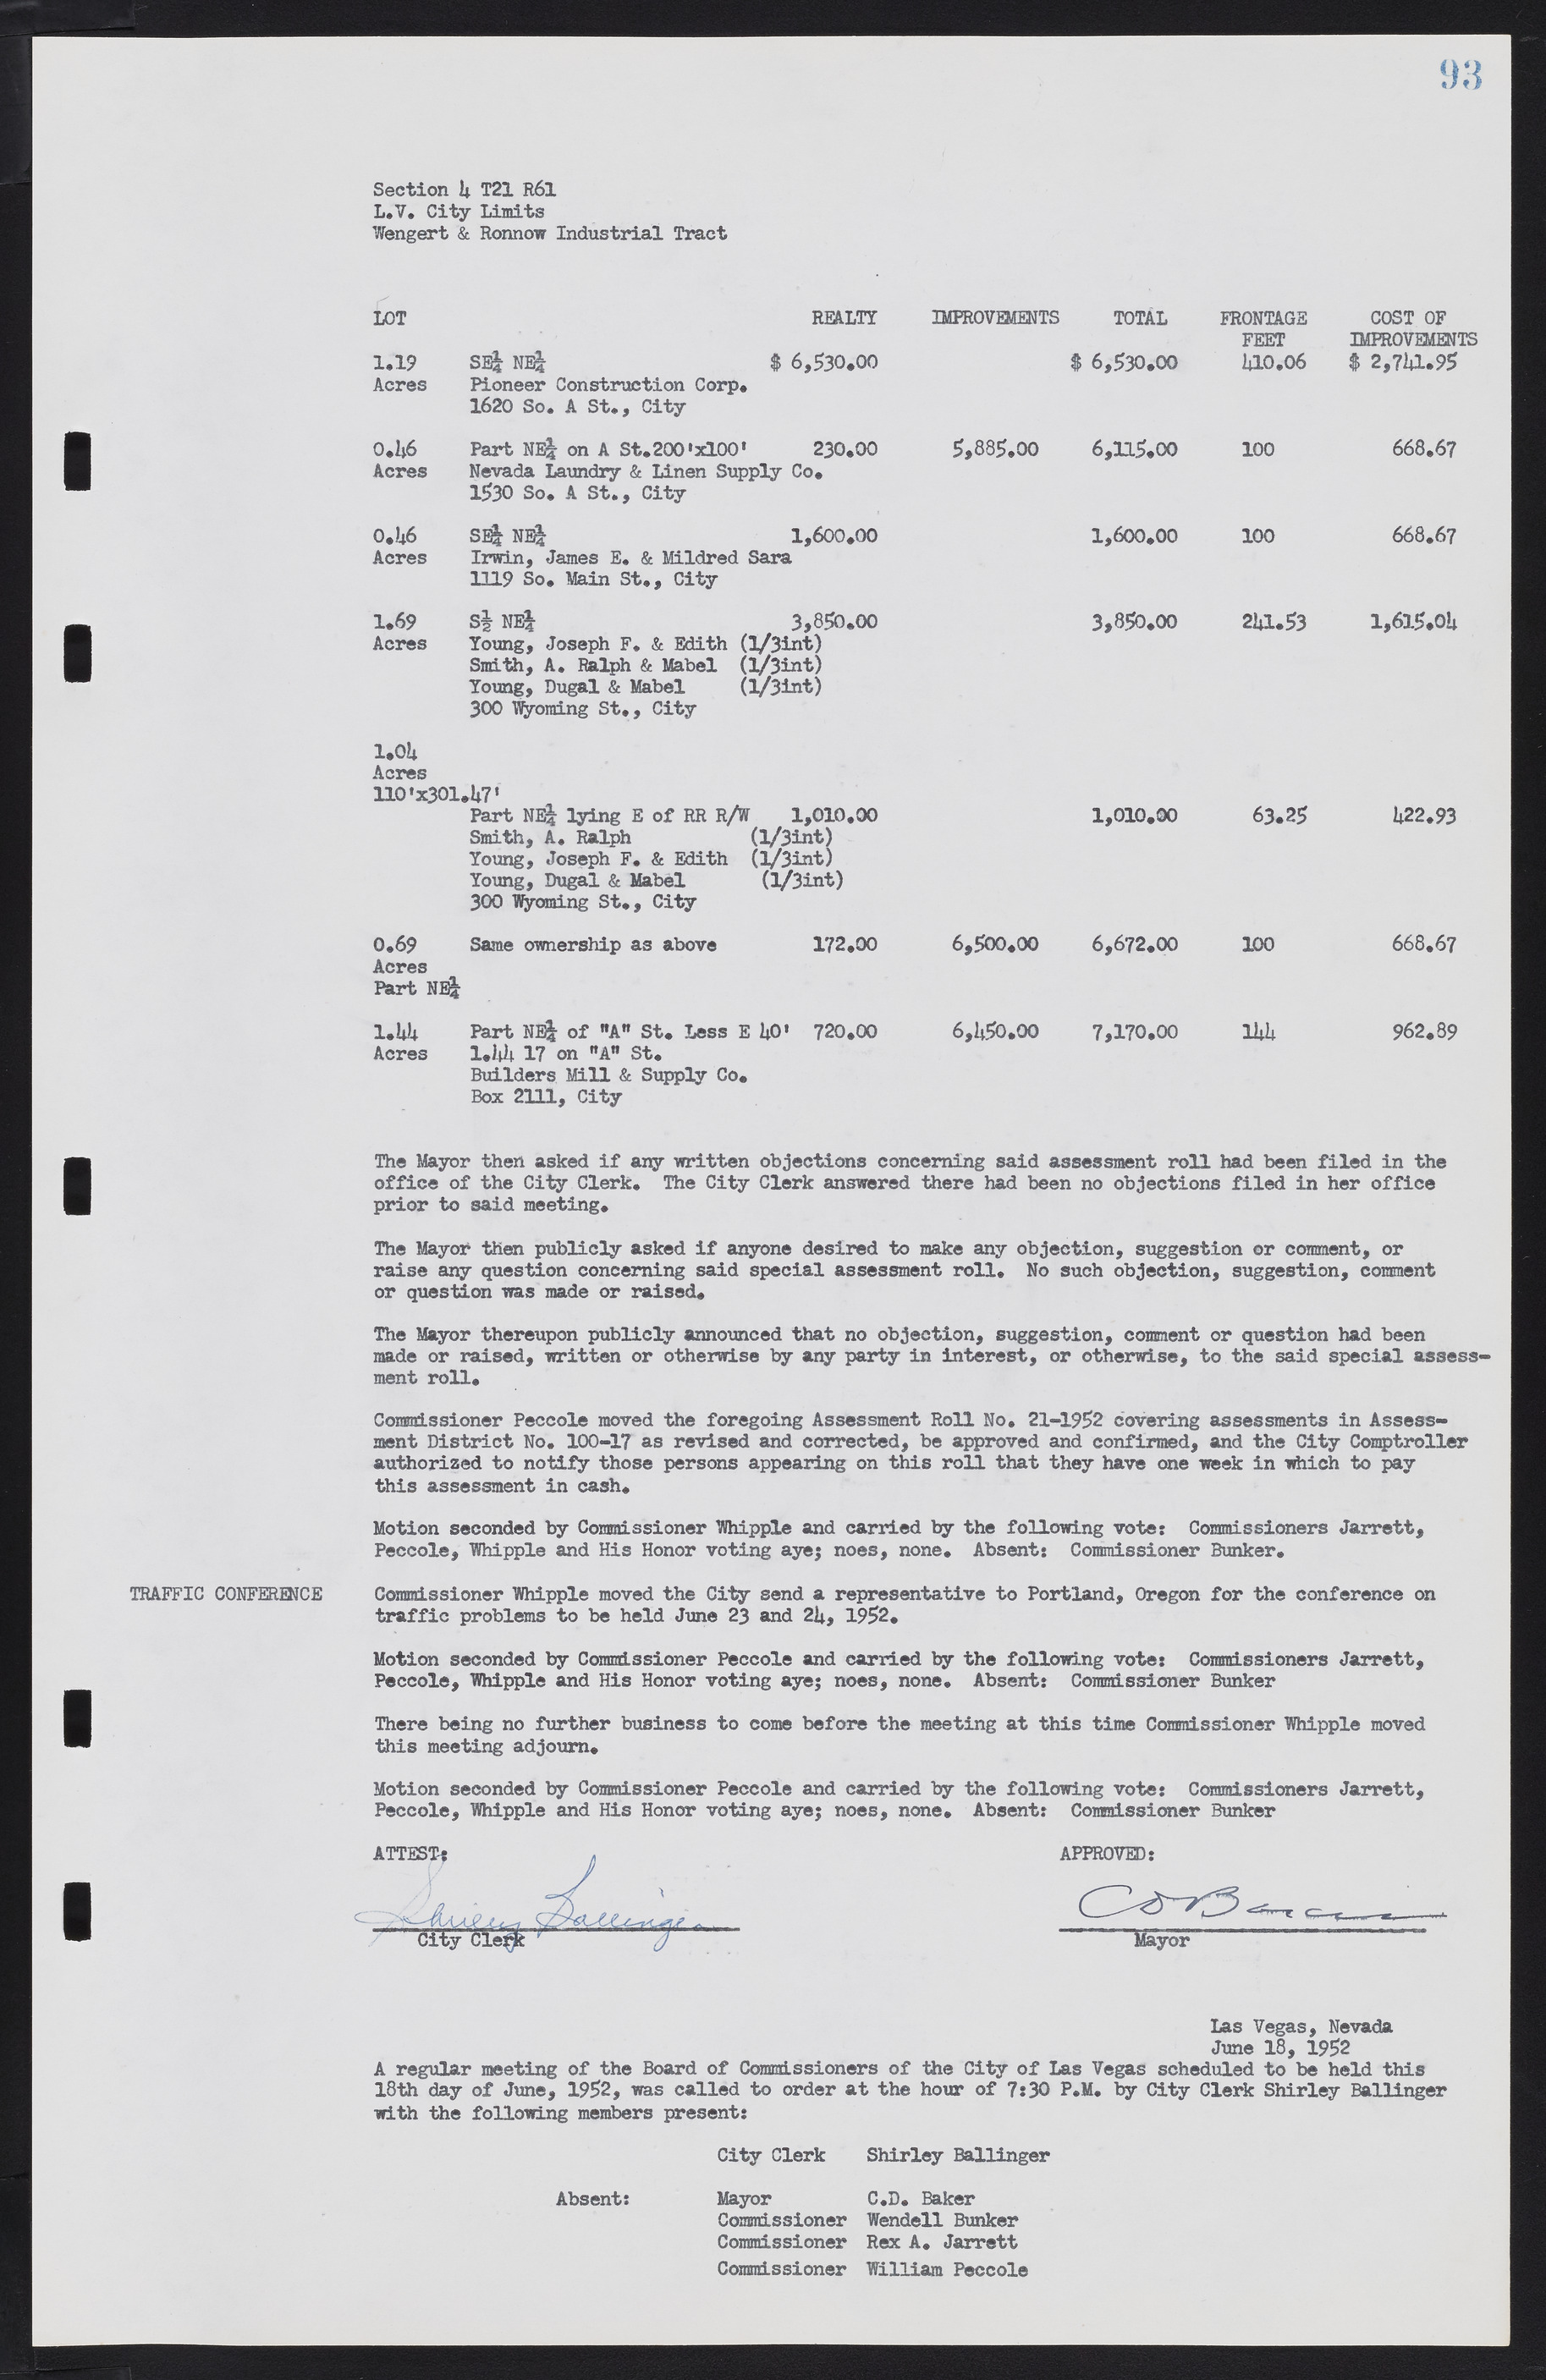 Las Vegas City Commission Minutes, May 26, 1952 to February 17, 1954, lvc000008-97